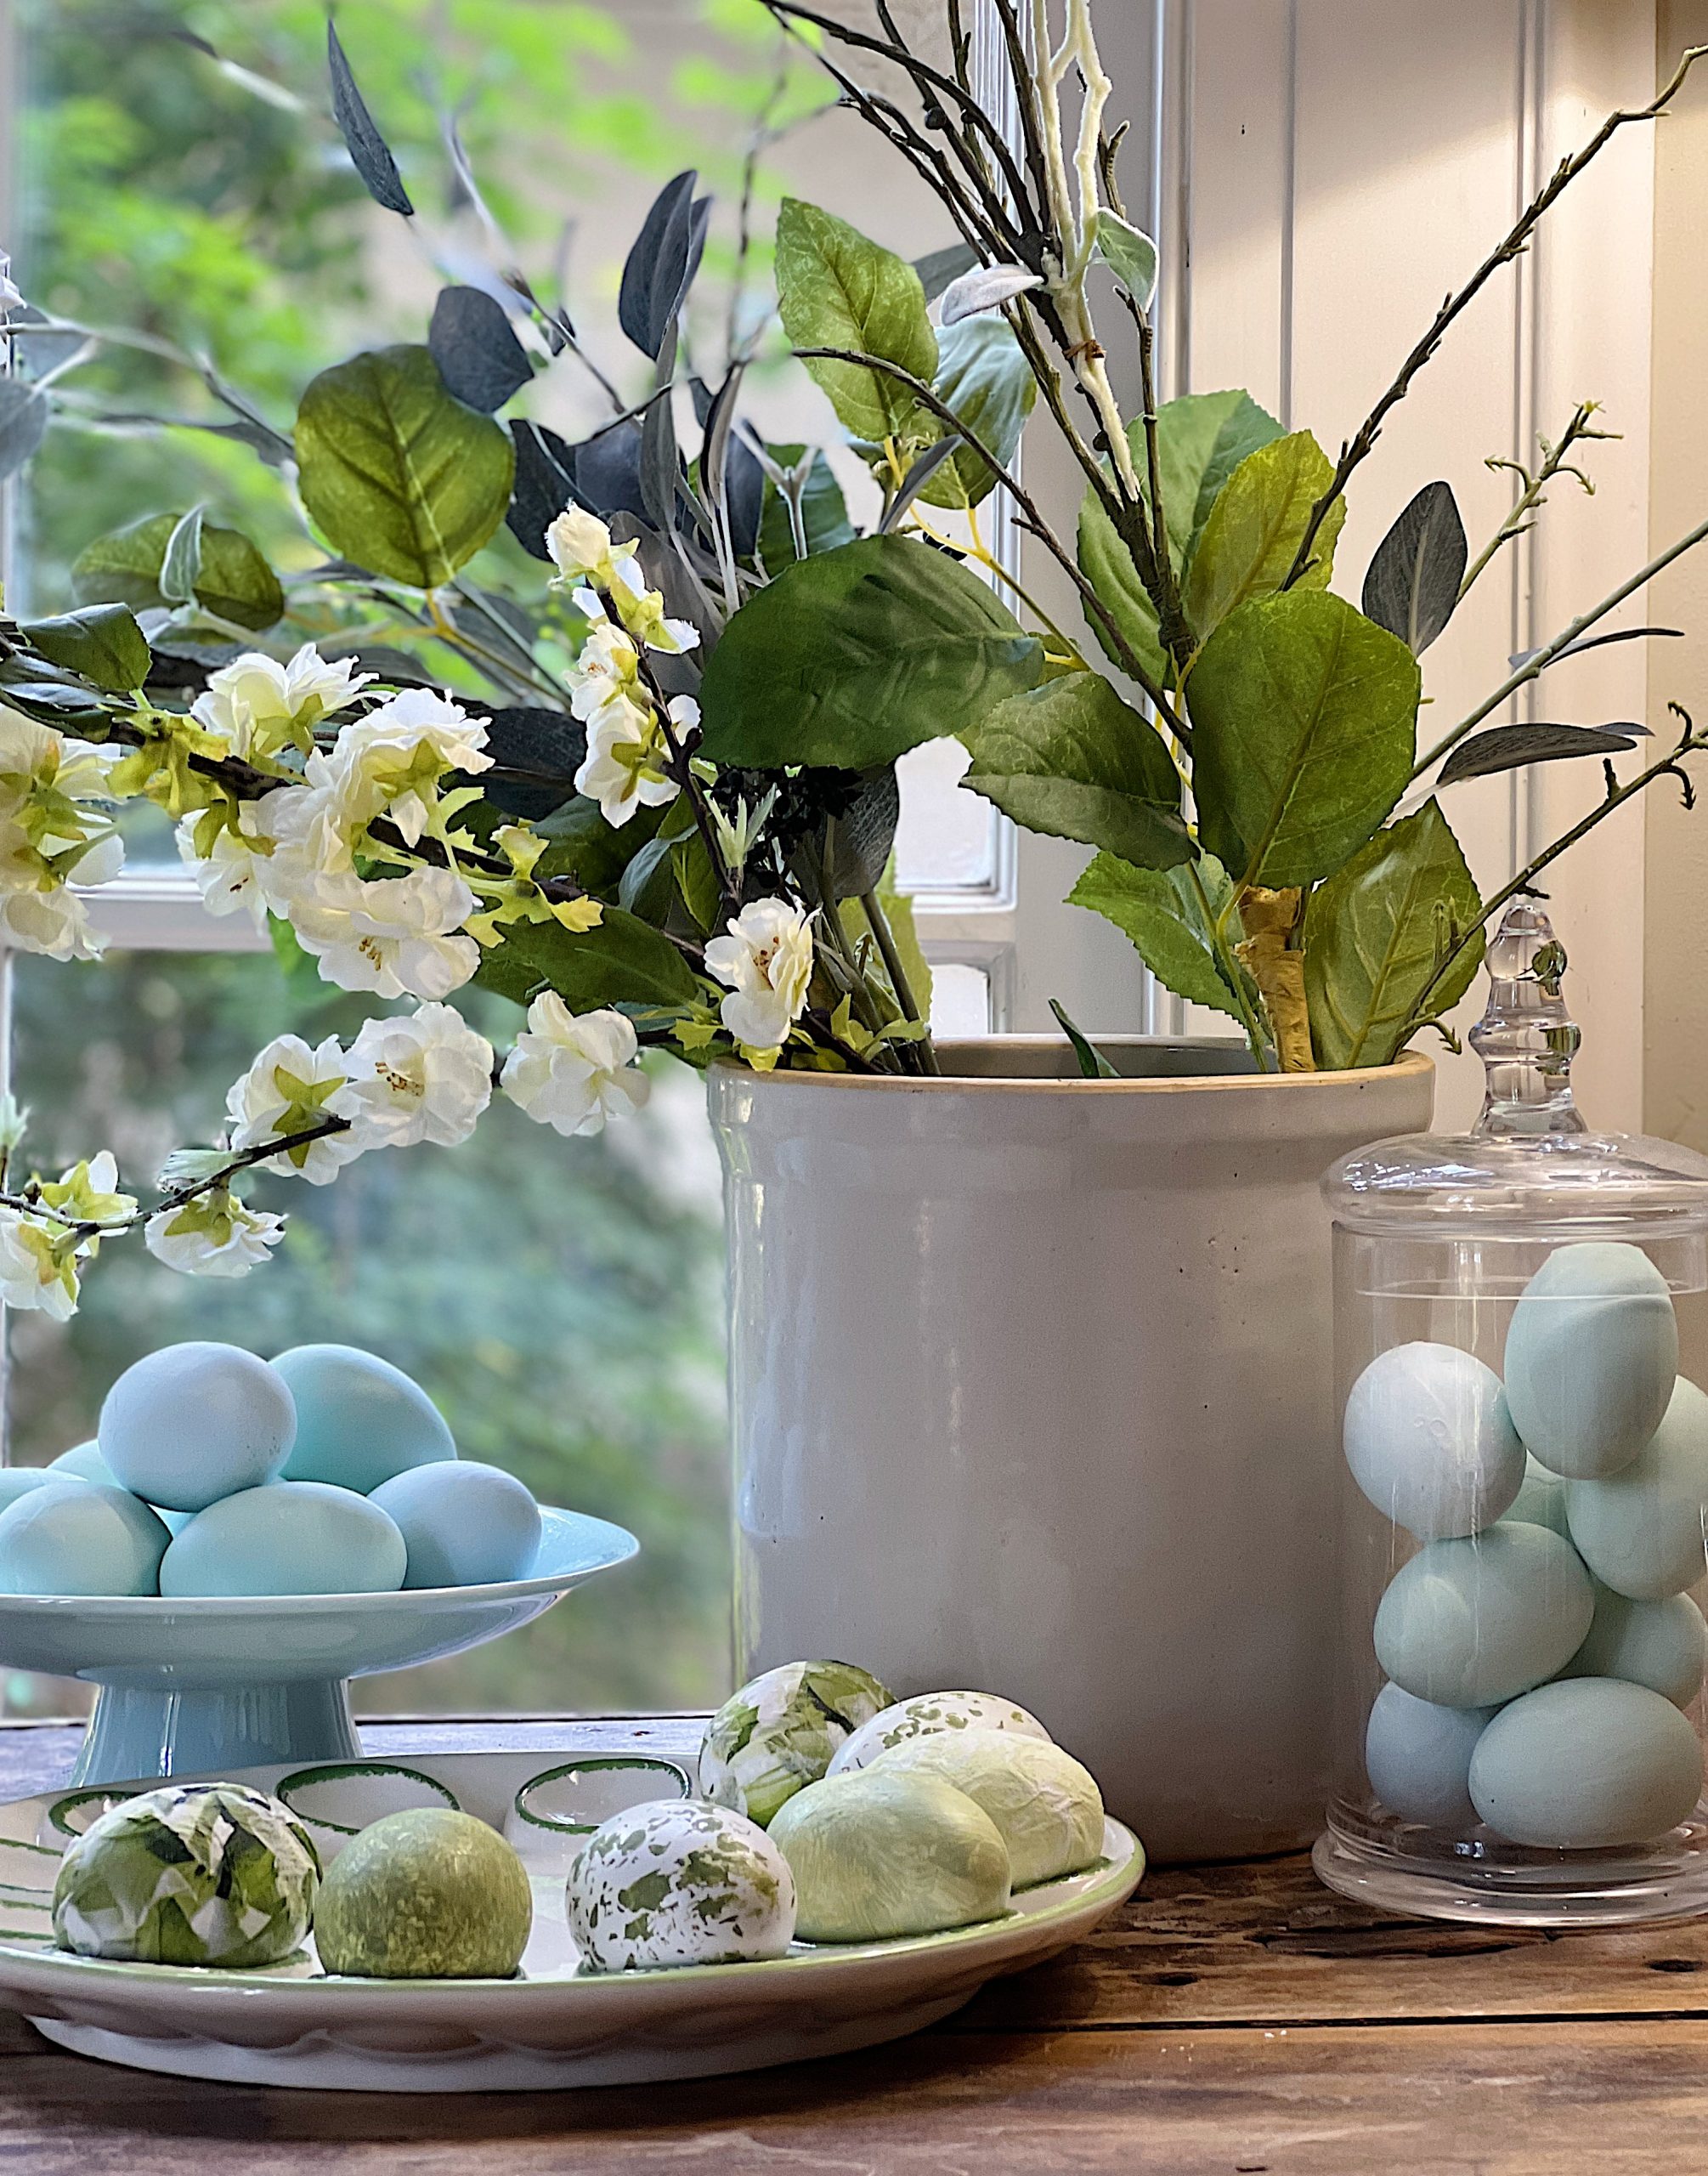 The Most Obvious Easter Decorations No One Uses